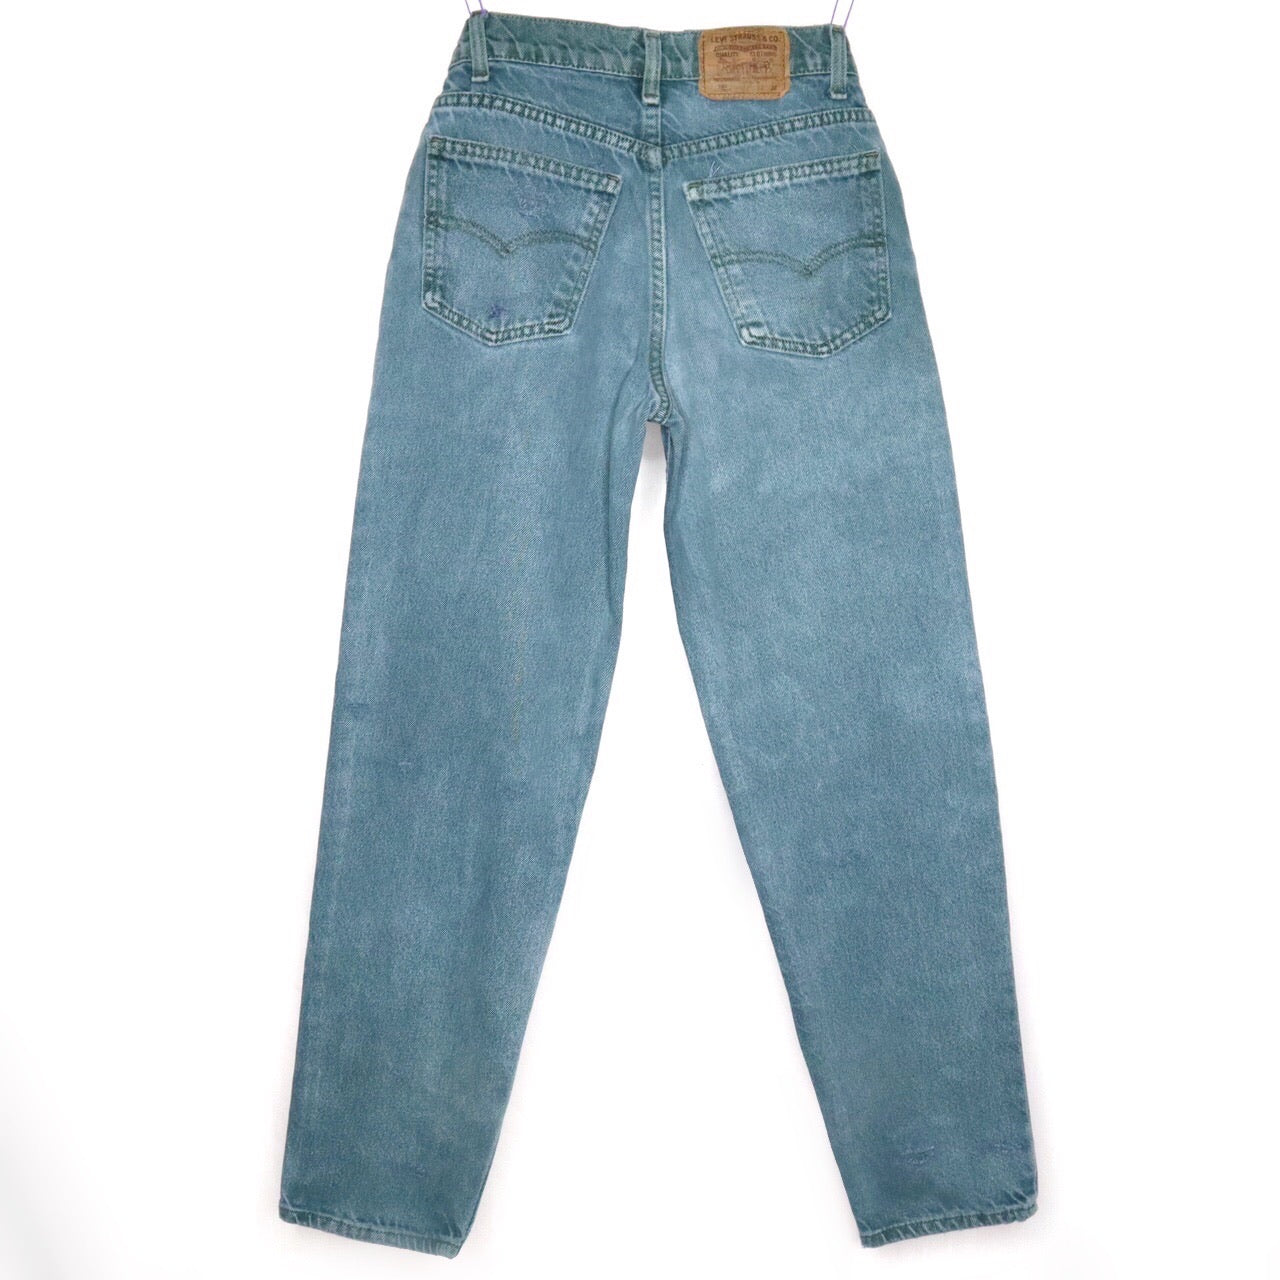 Vintage 90s Teal High Waisted Levis Jeans